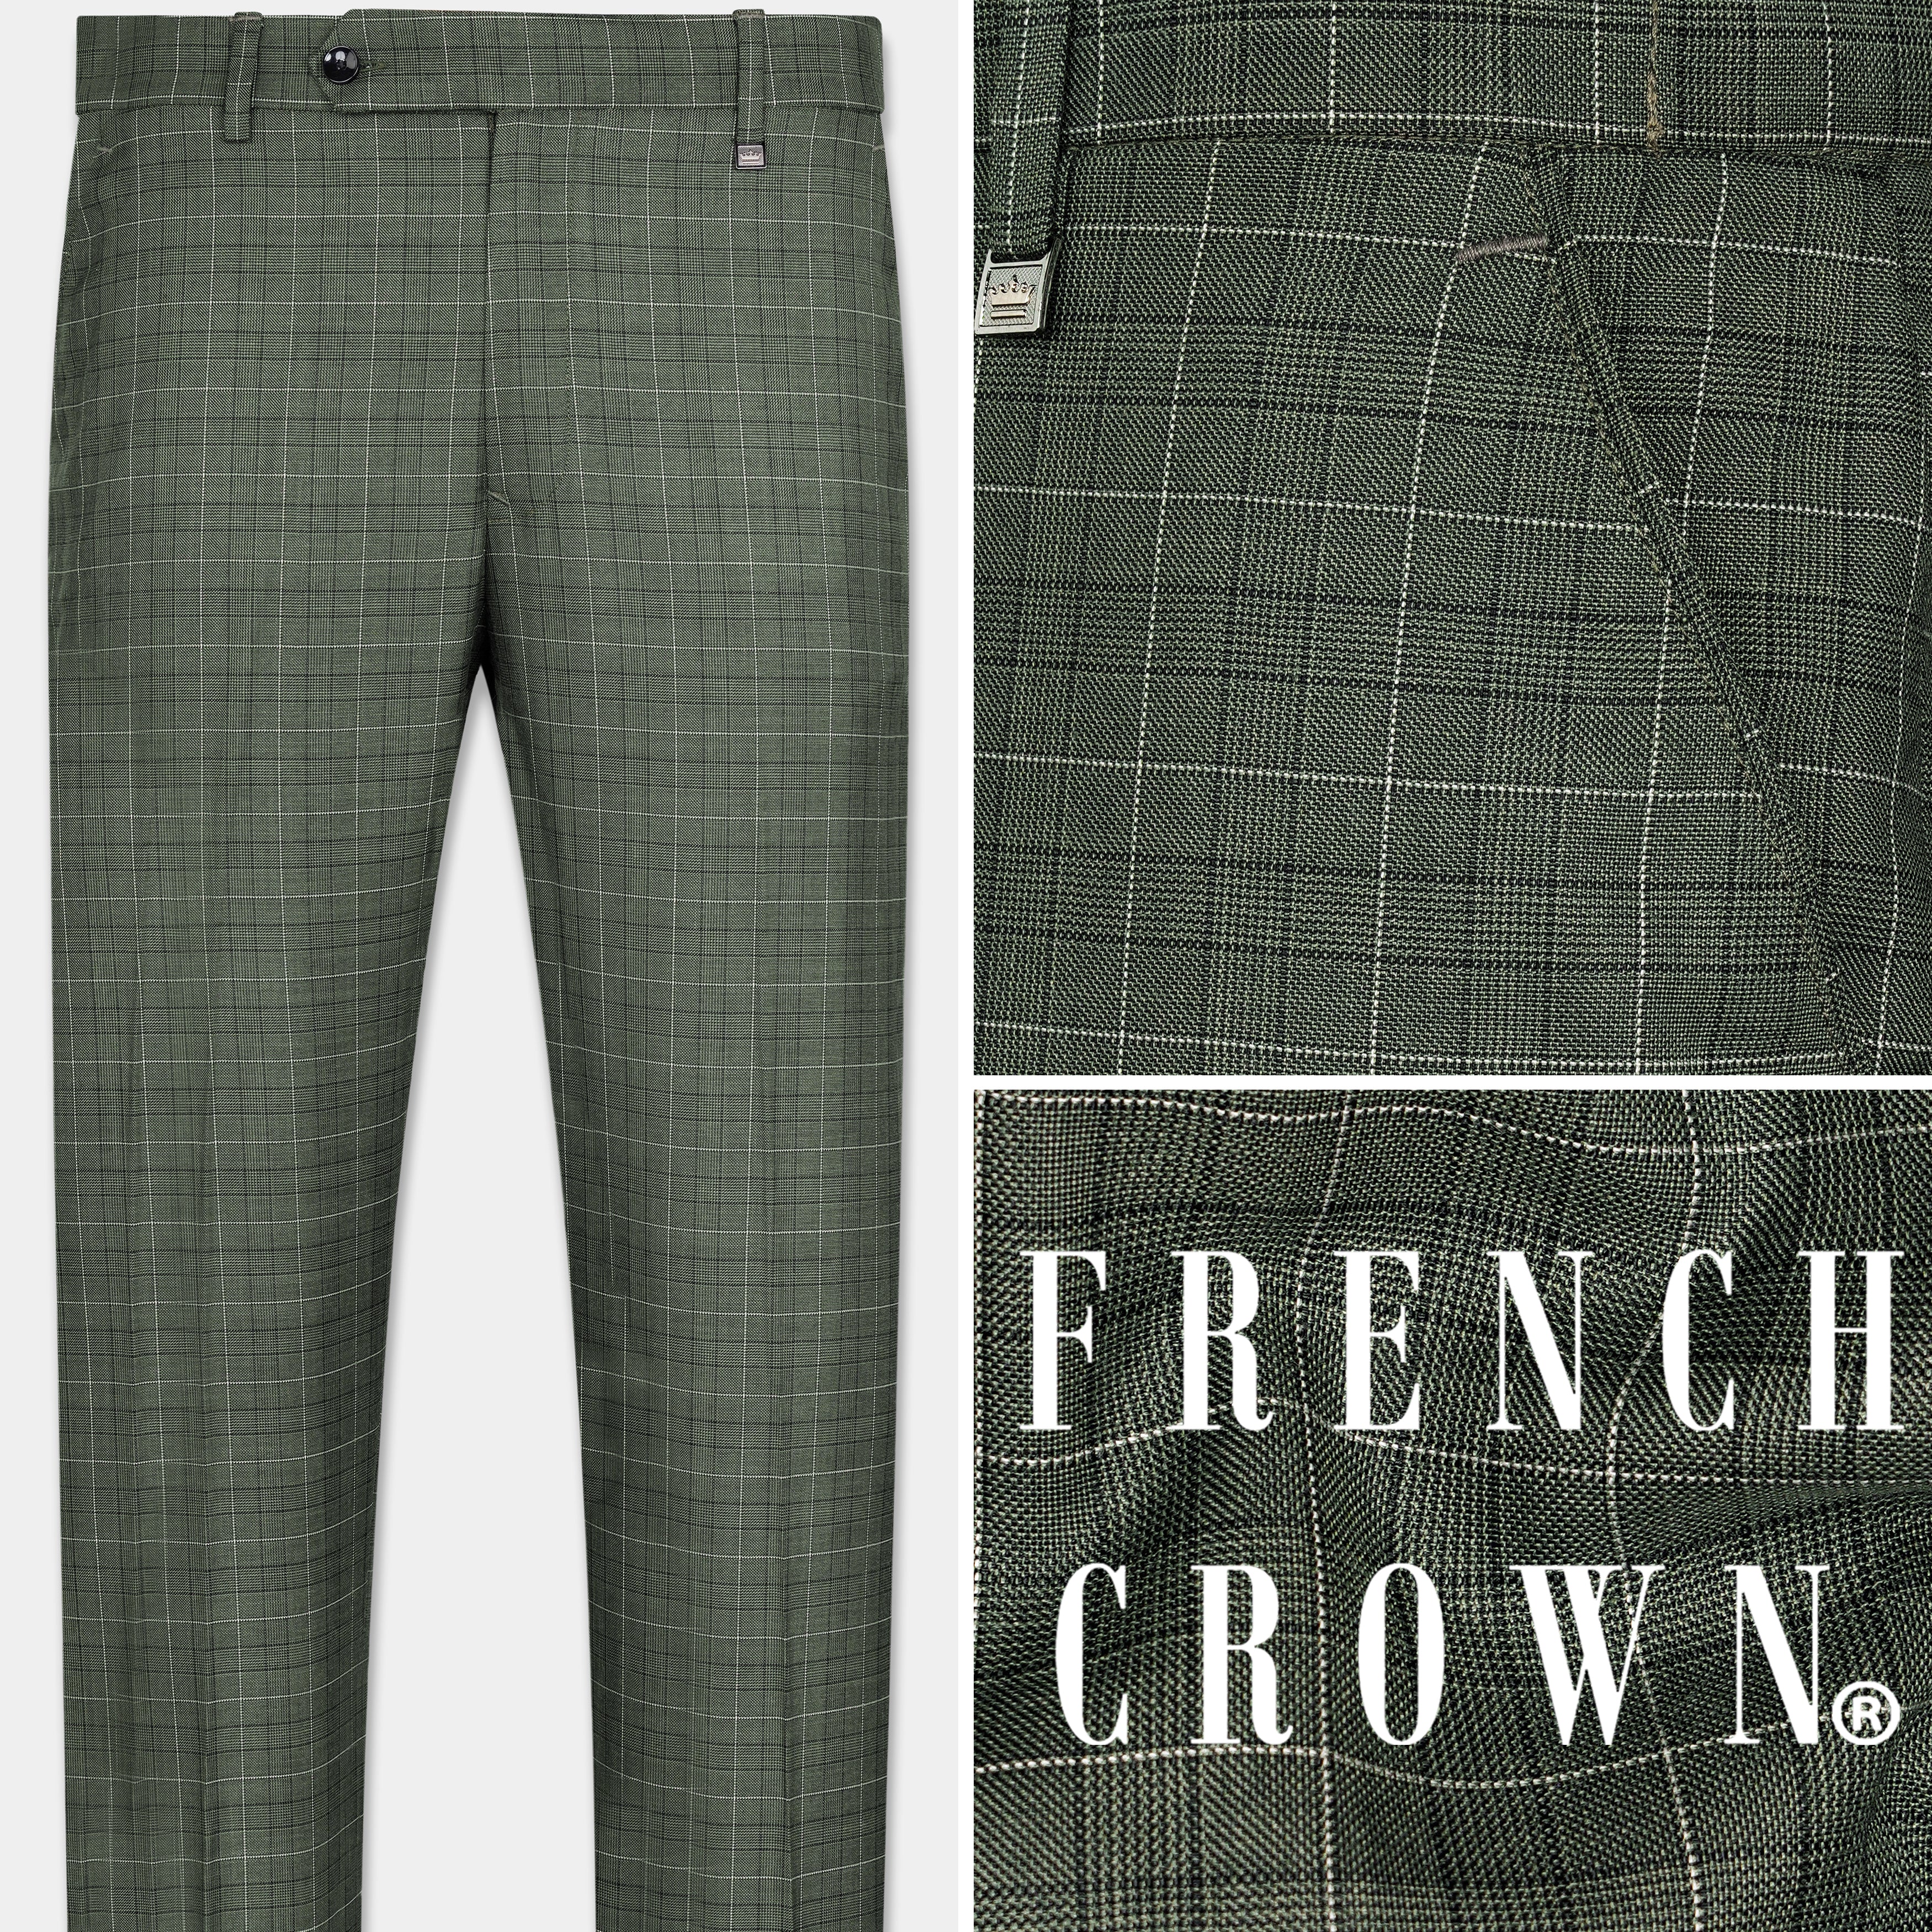 Grayson Silver and White Plaid Pants – THE WEARHOUSE